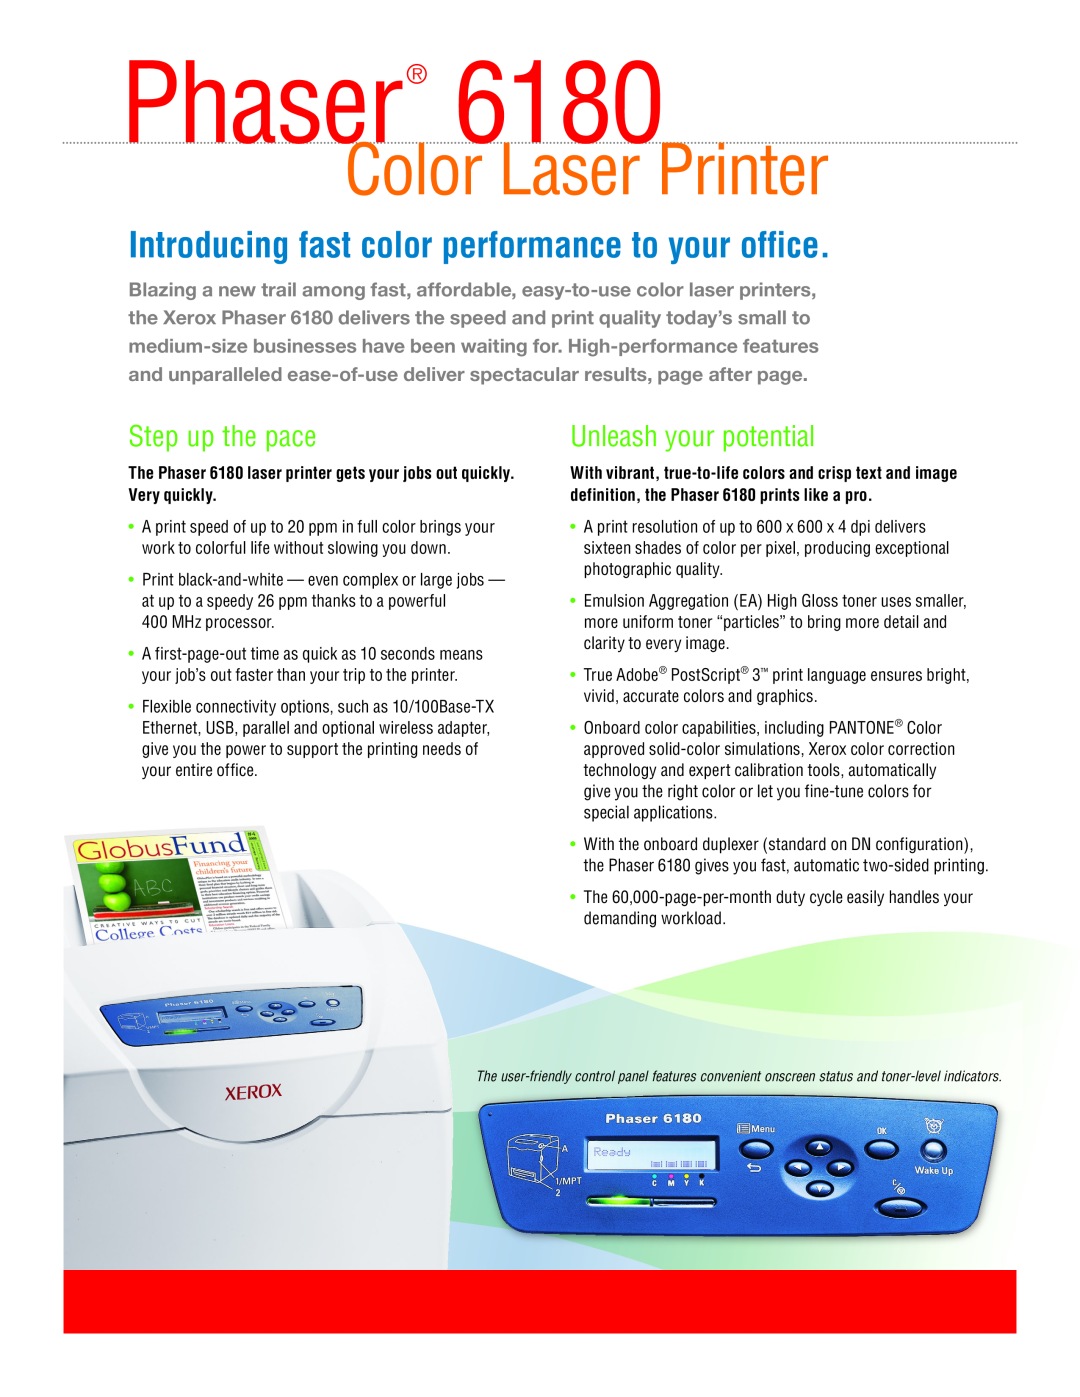 Xerox 6180 manual Step up the pace, Unleash your potential, Phaser, Color Laser Printer 